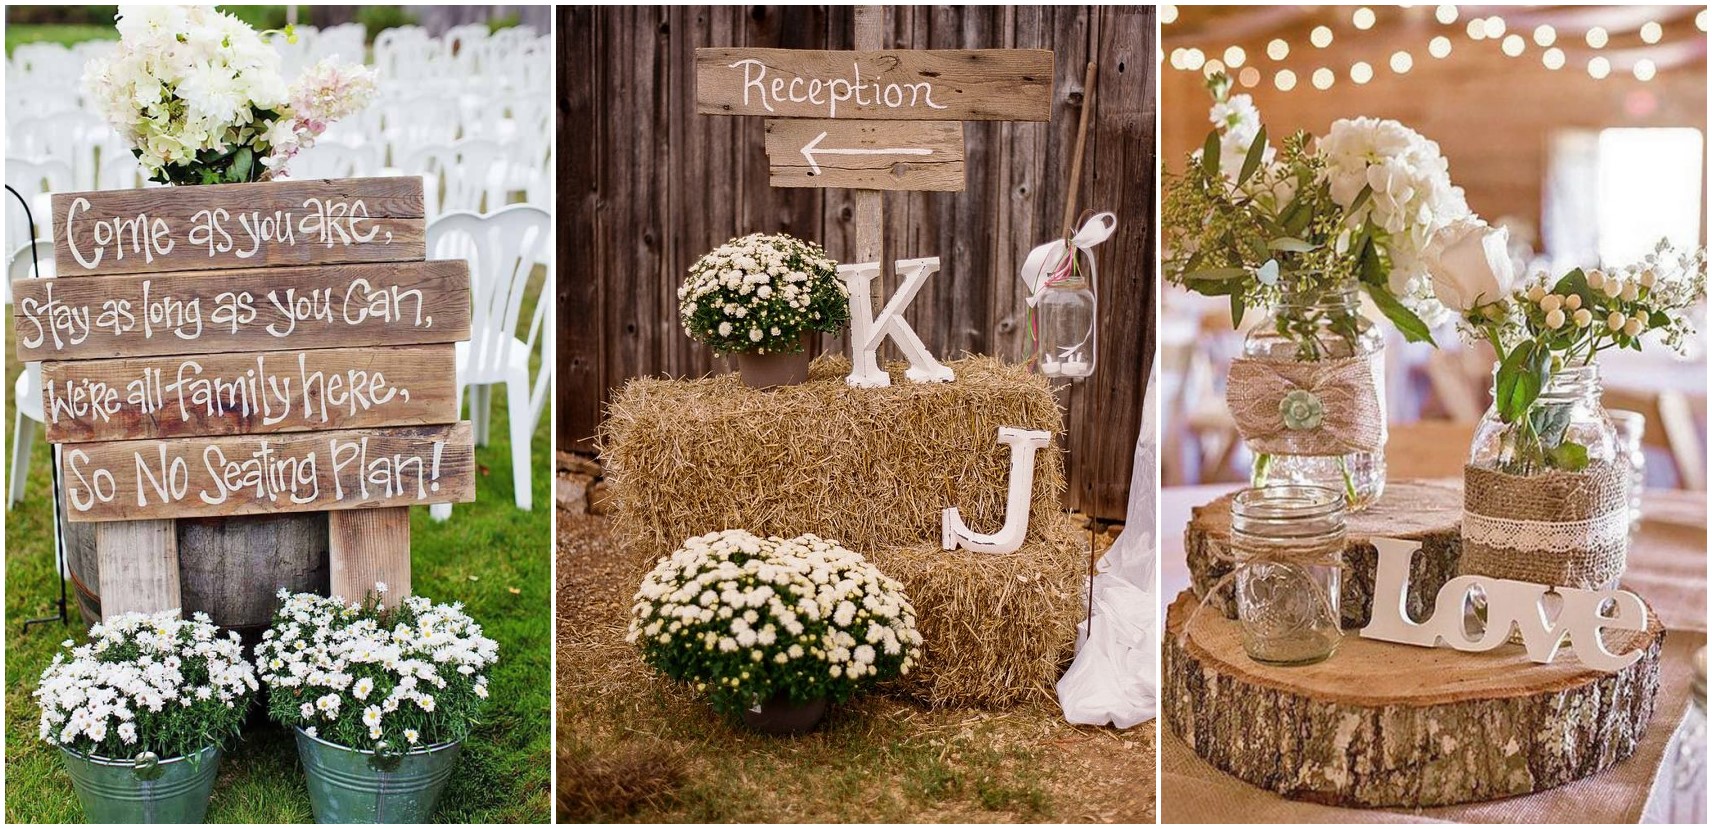 16 Rustic Country Wedding Ideas to Shine in 2019